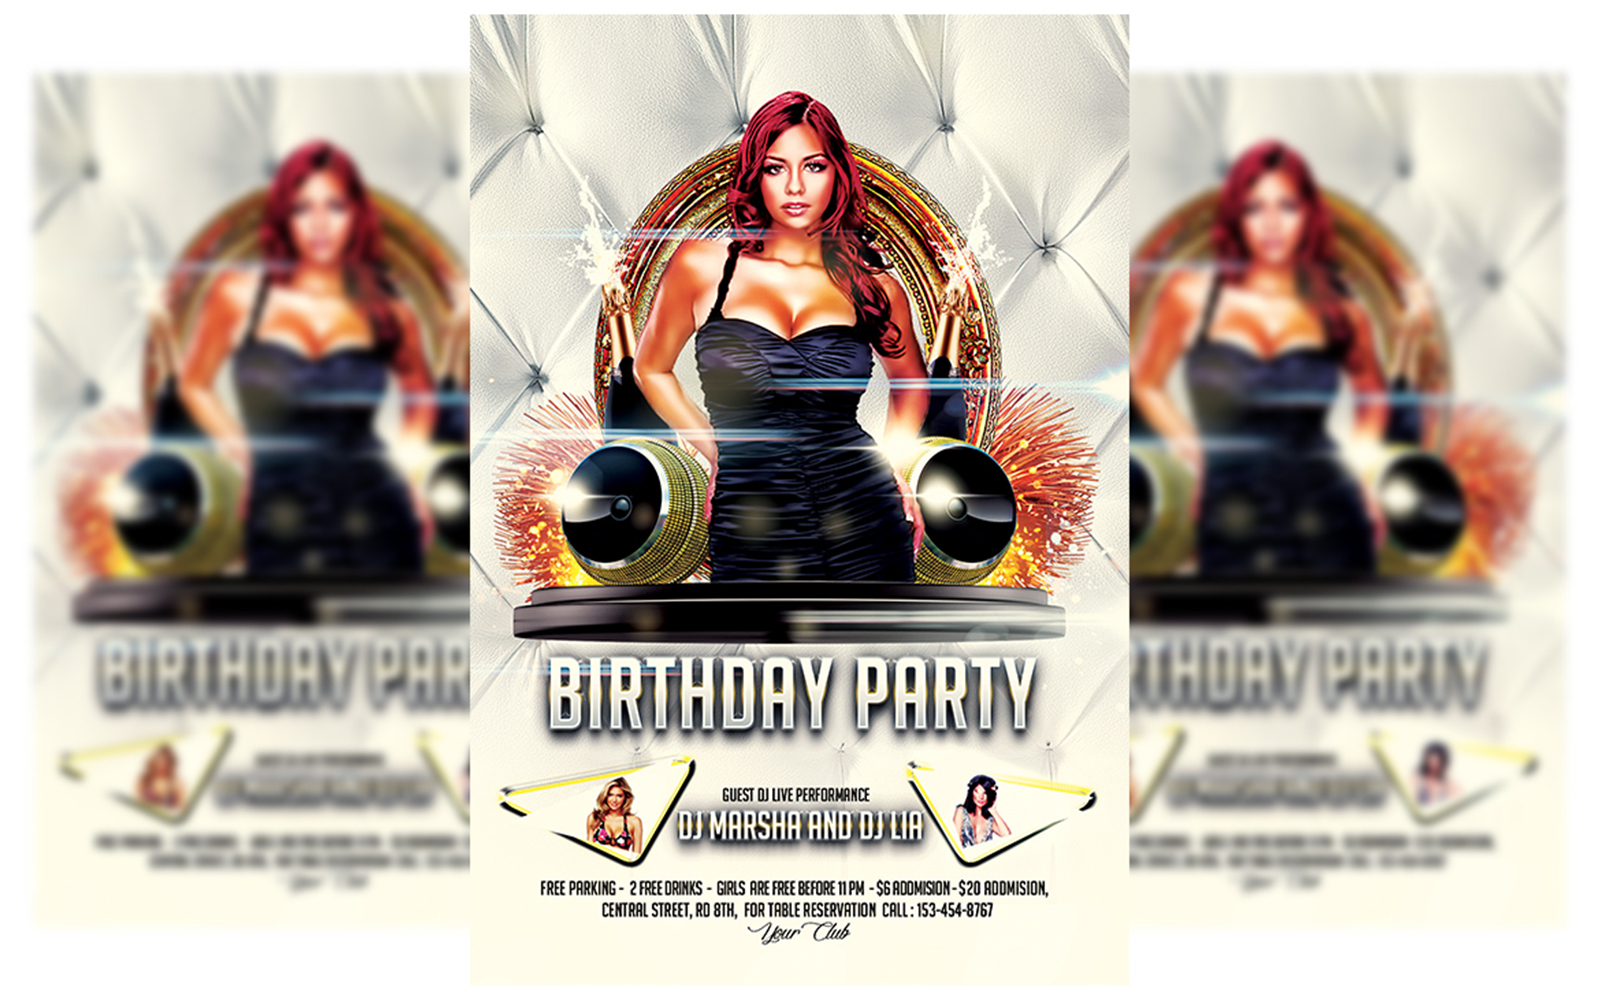 Birthday Party Flyer Template #2